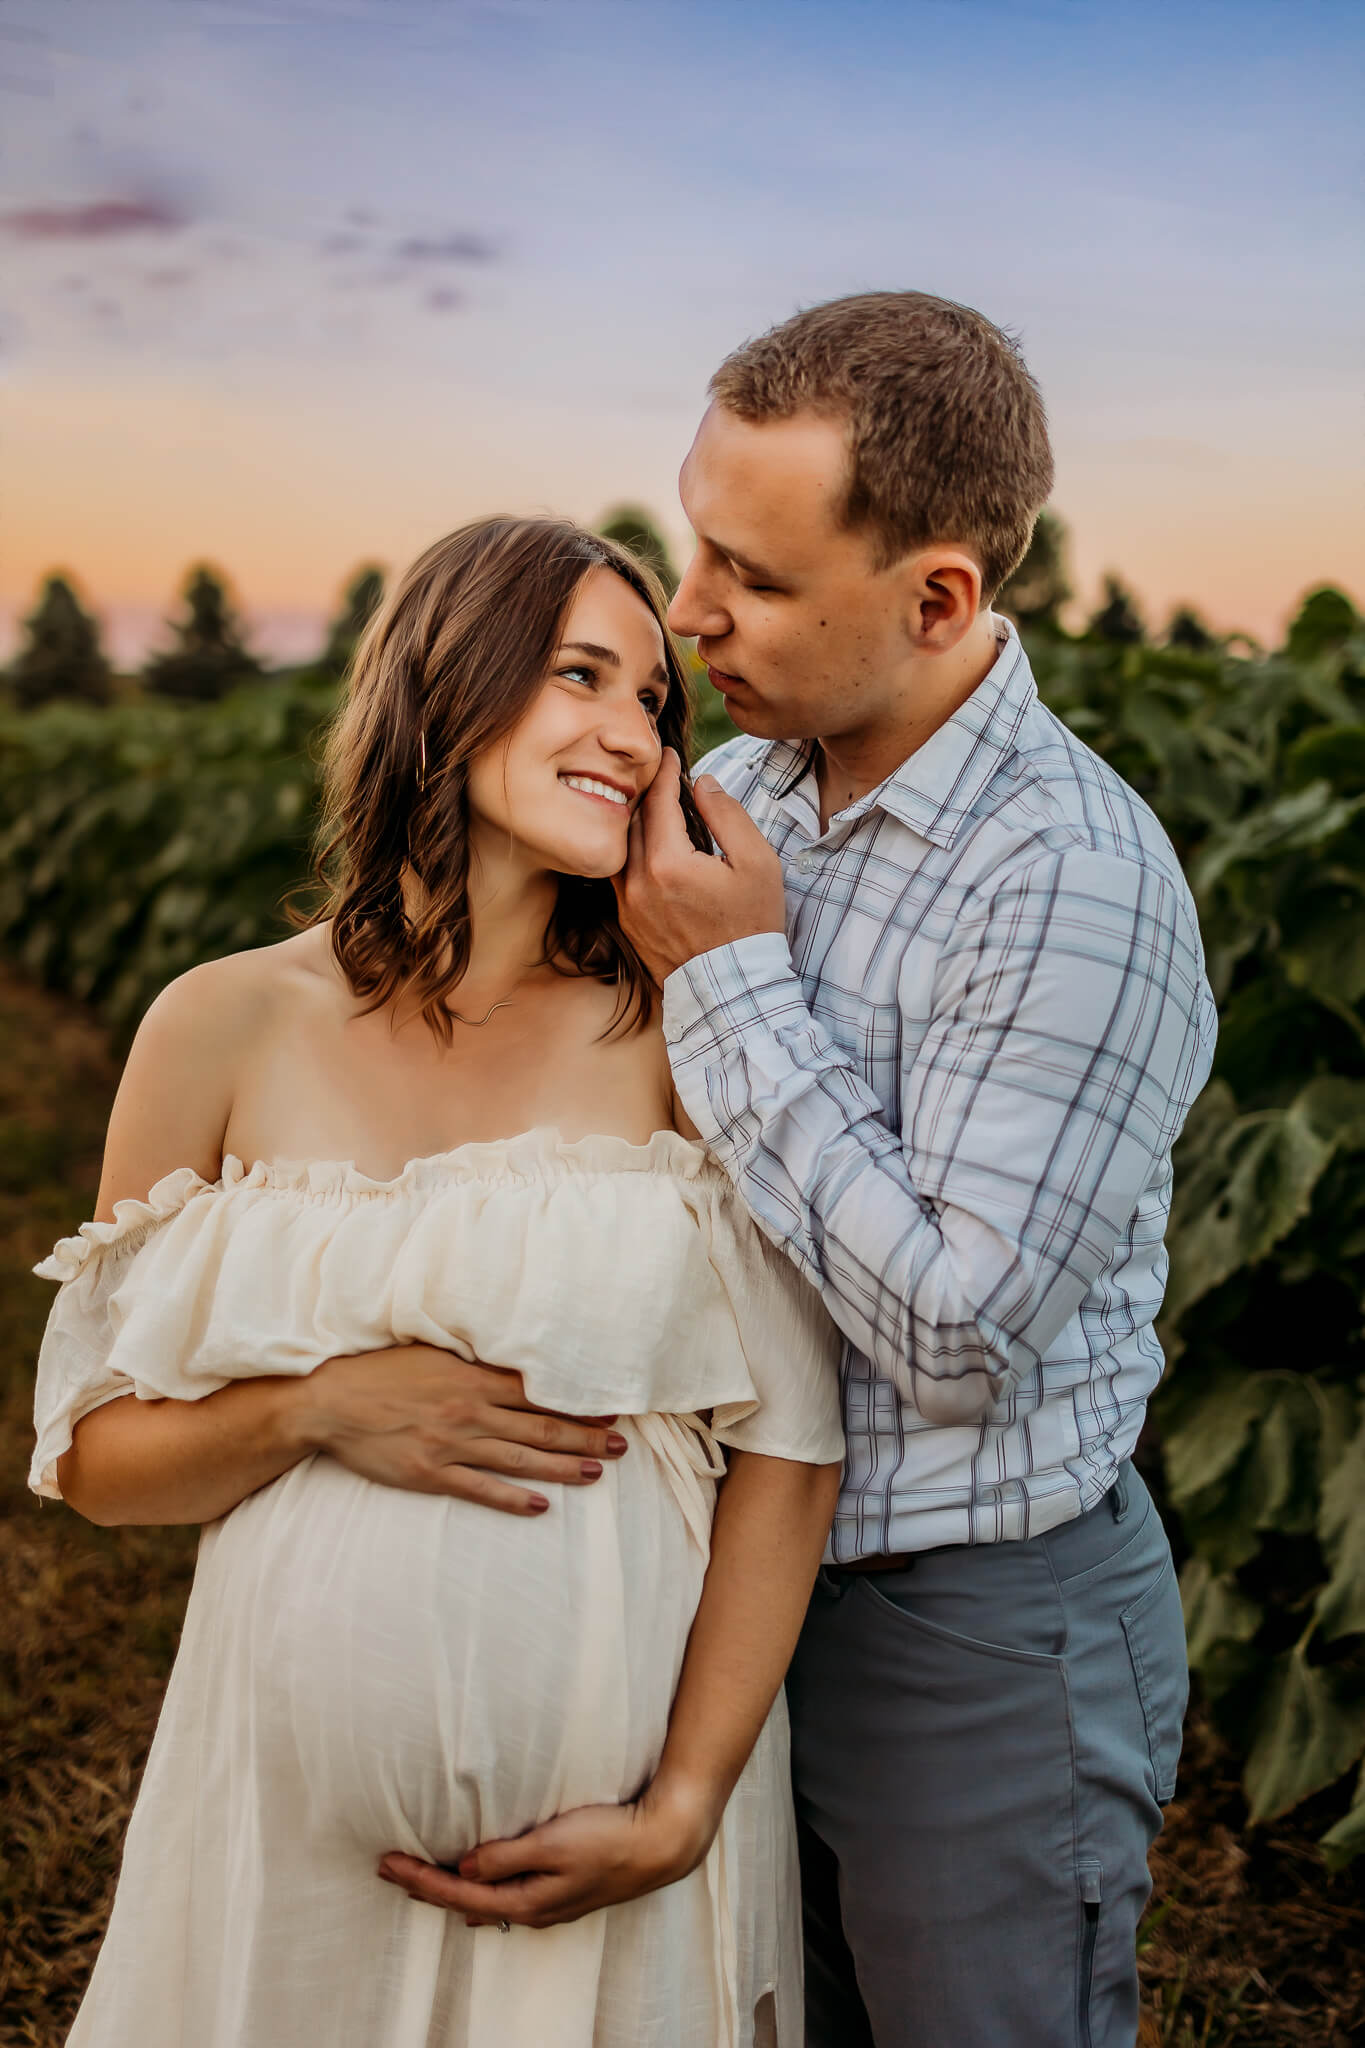 Expecting parents share a happy moment in a sunflower farm